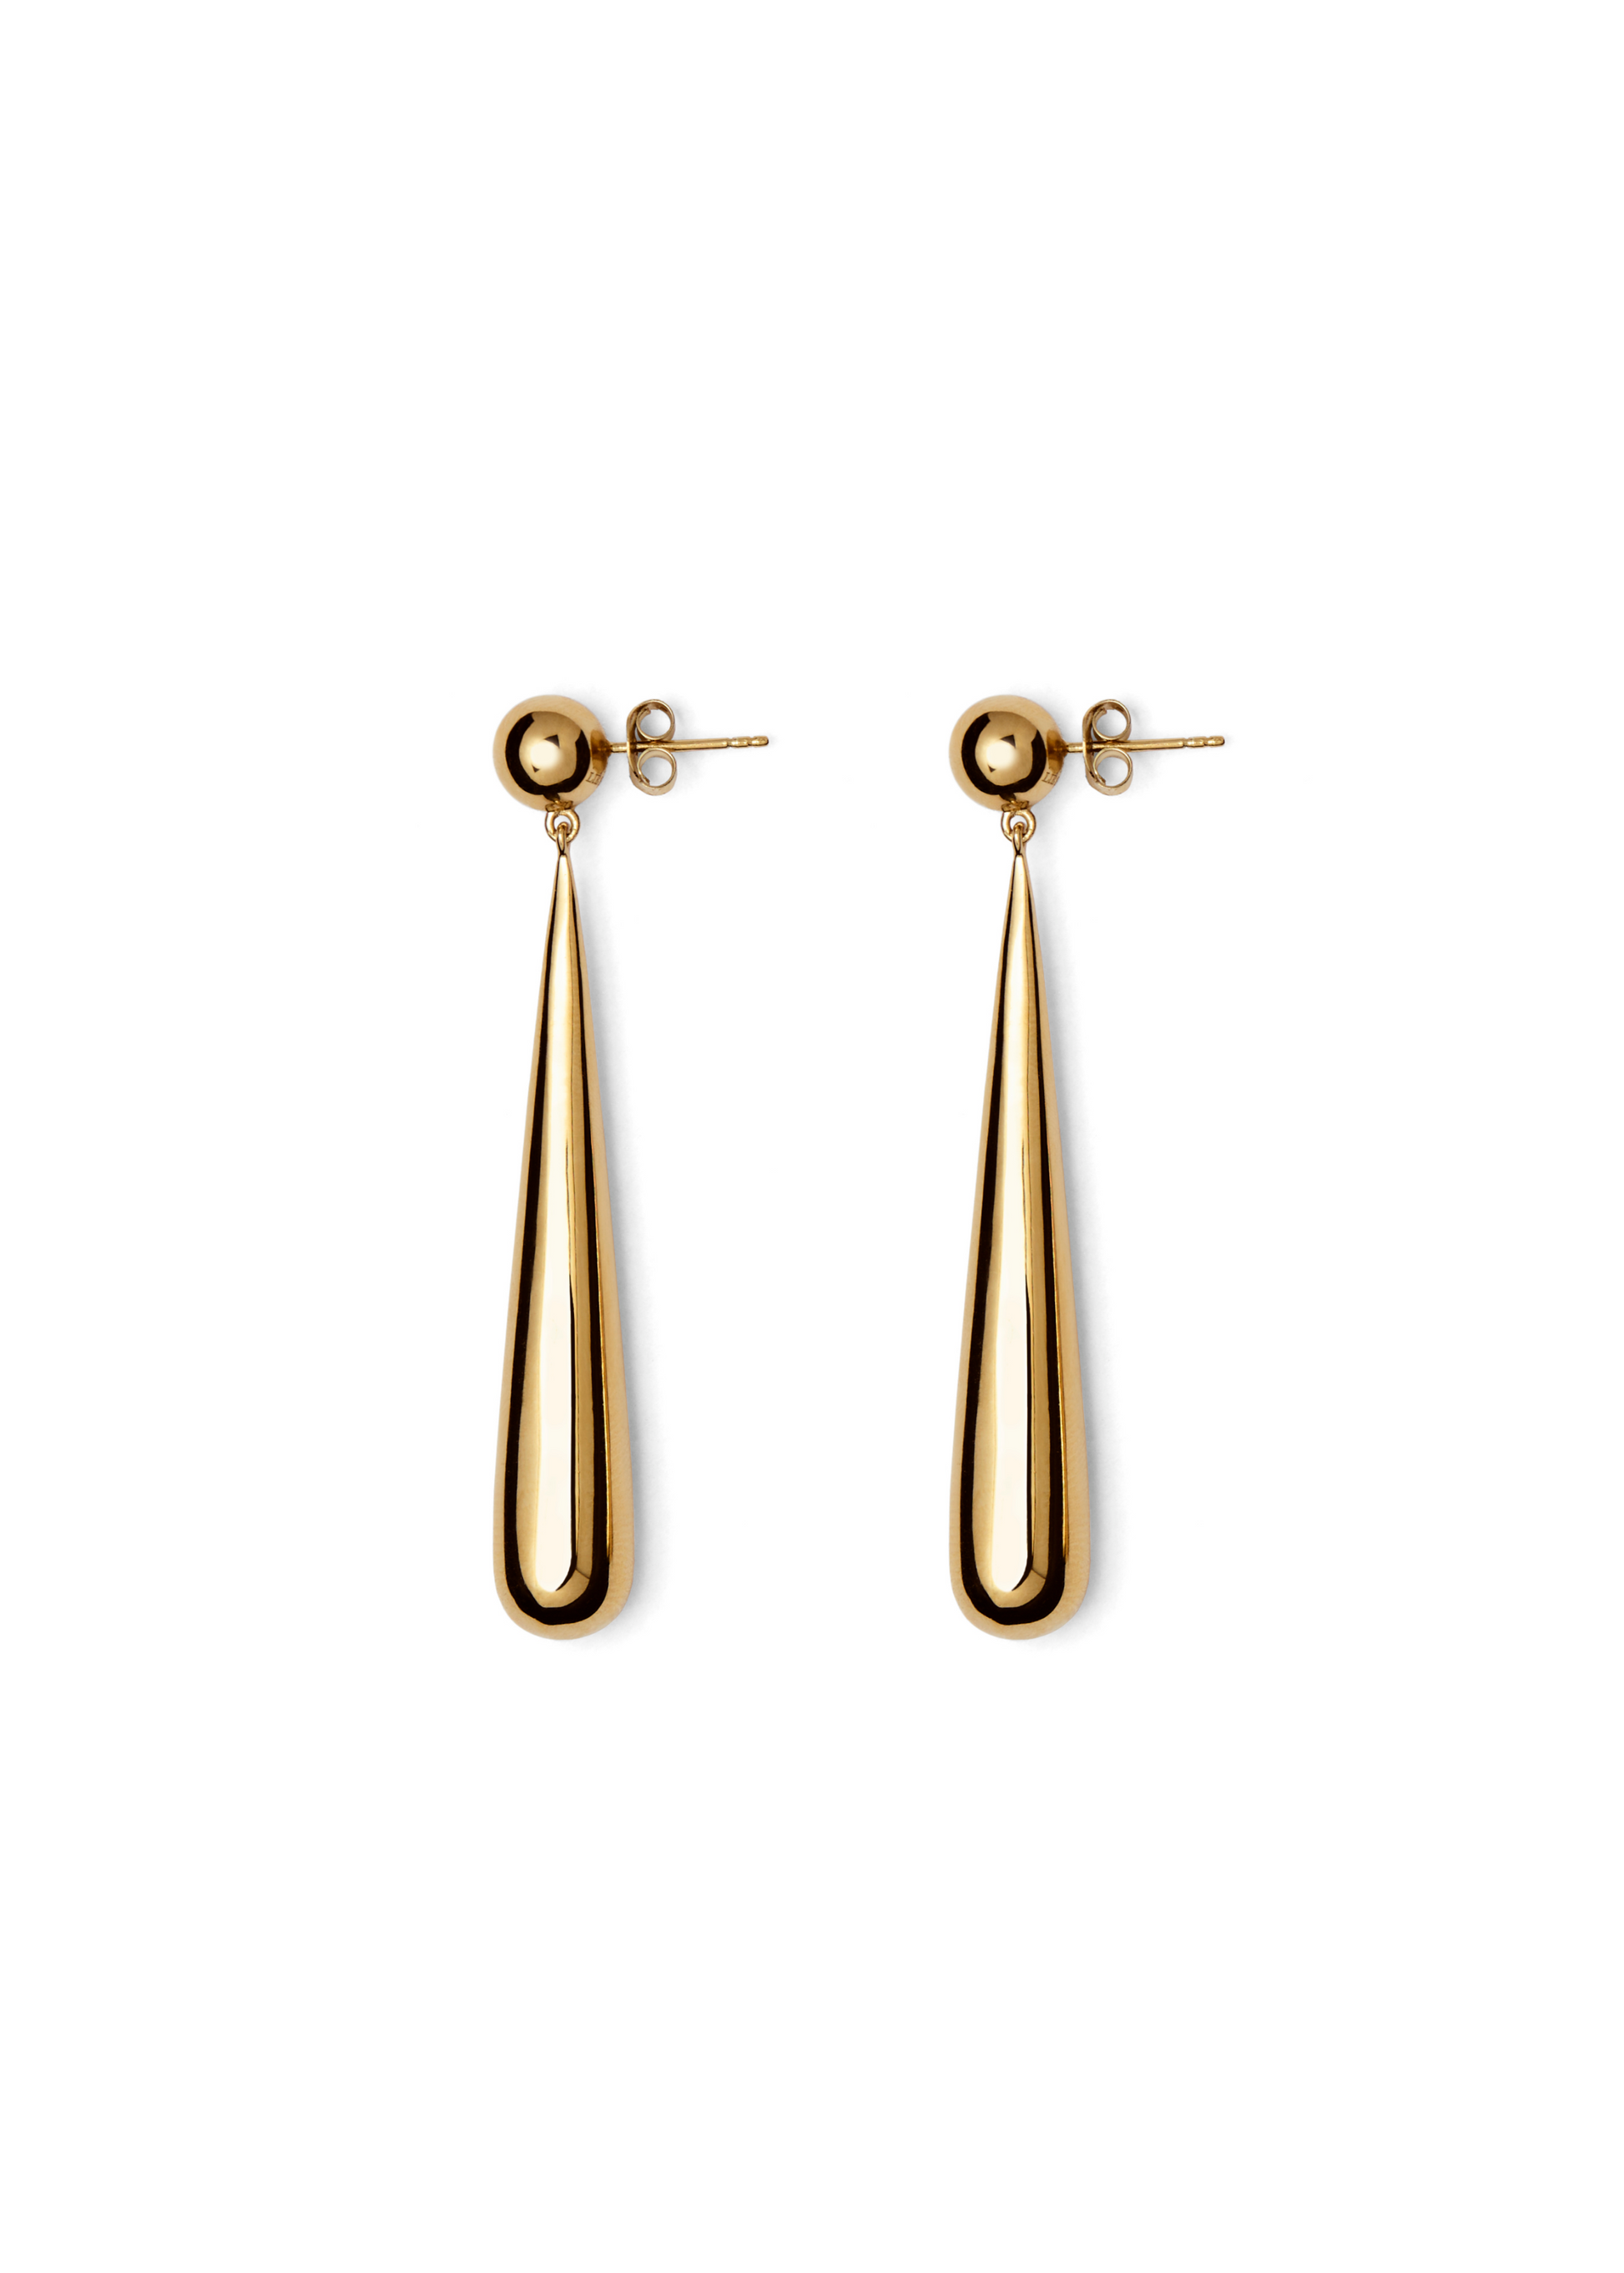 The Louise Earrings in gold or silver